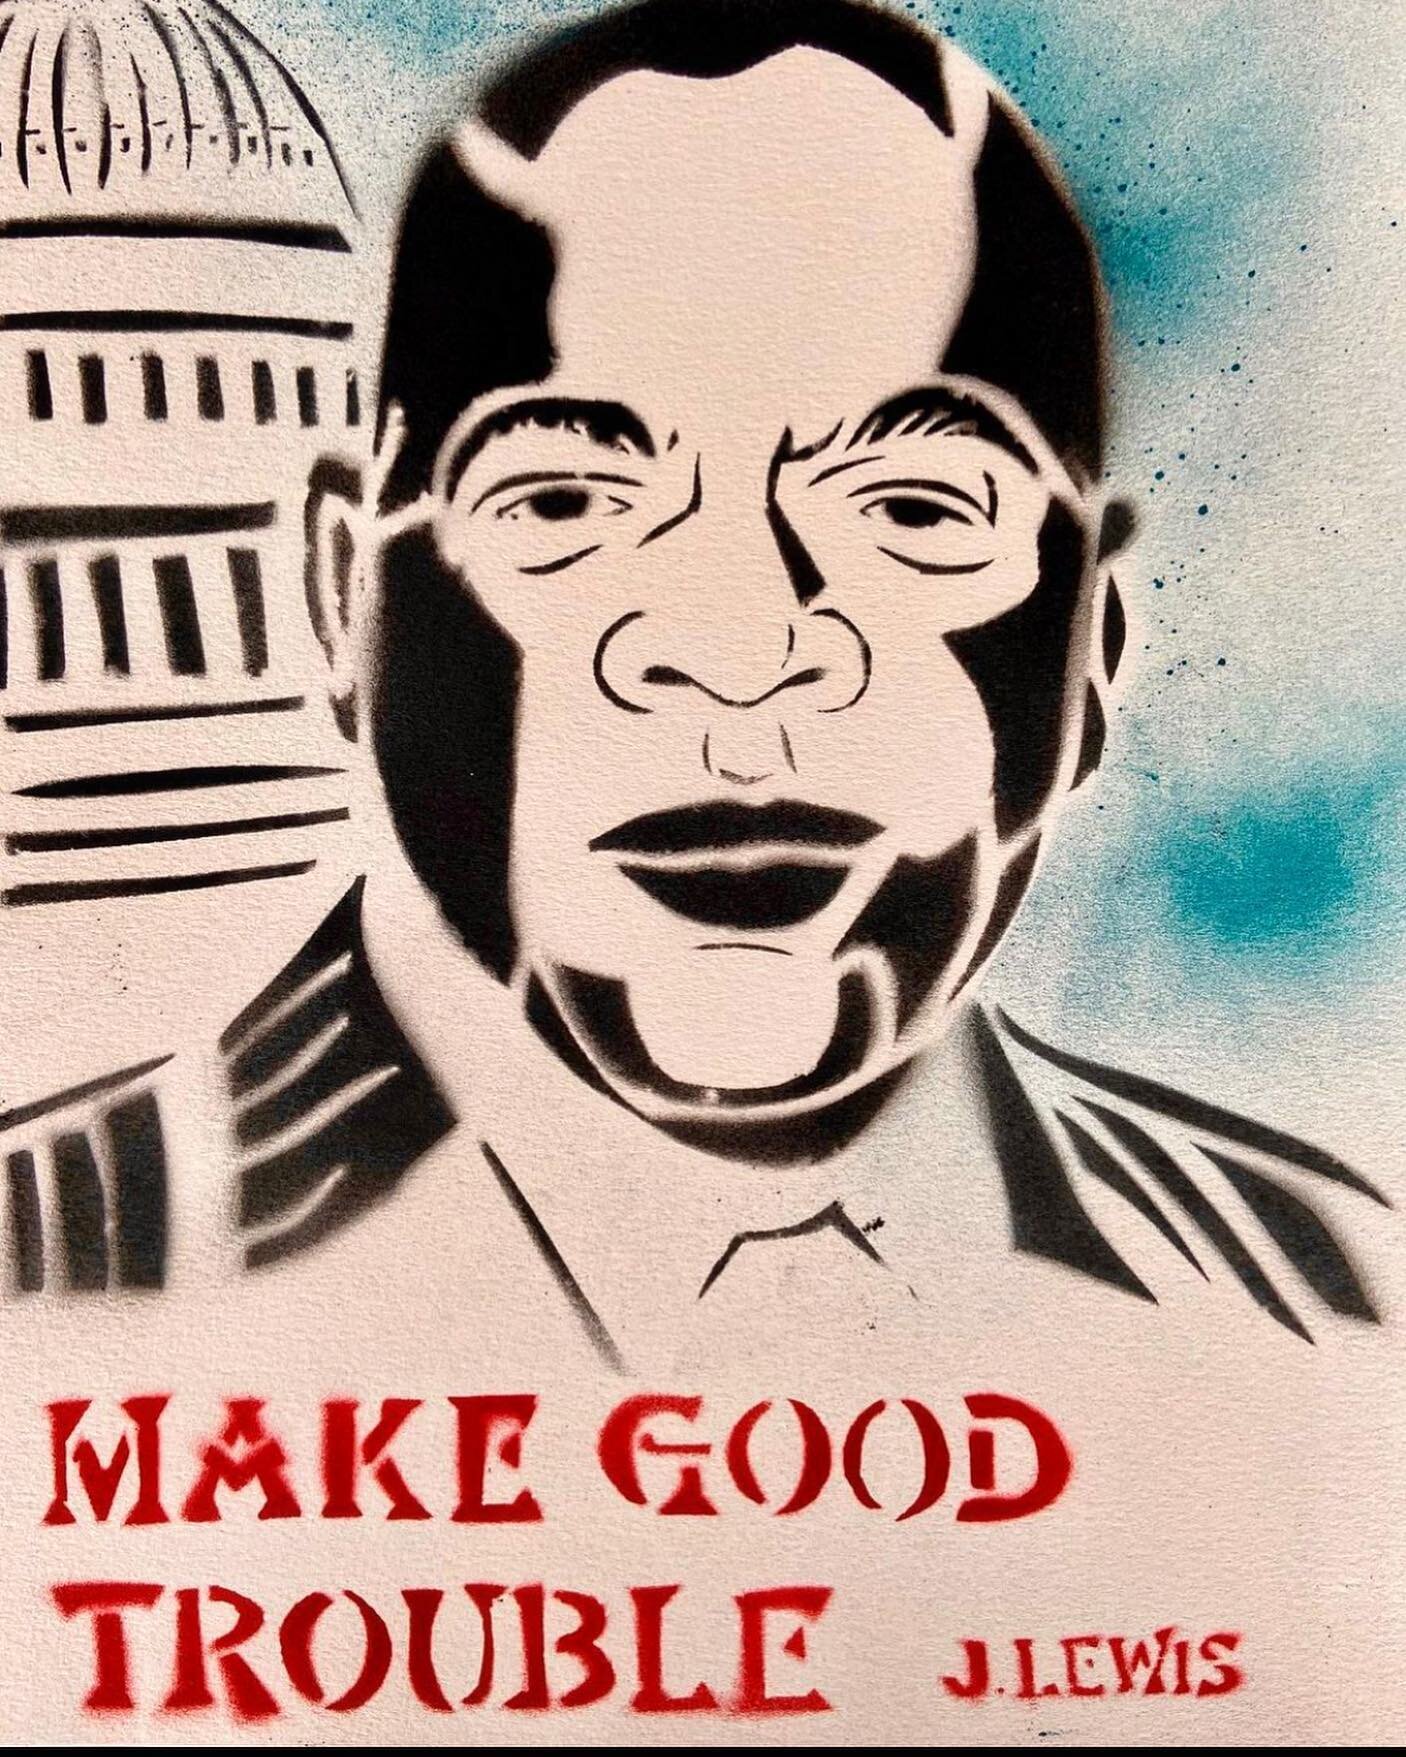 Sharing work today by #printmakersagainstracism participant Faith Stone @faithstoneart! 

From her original caption:
・・・
Time for another round of Printmaking as Resistance!
All proceeds of sales will go to NAACP Legal Defense Find. My passion is to 